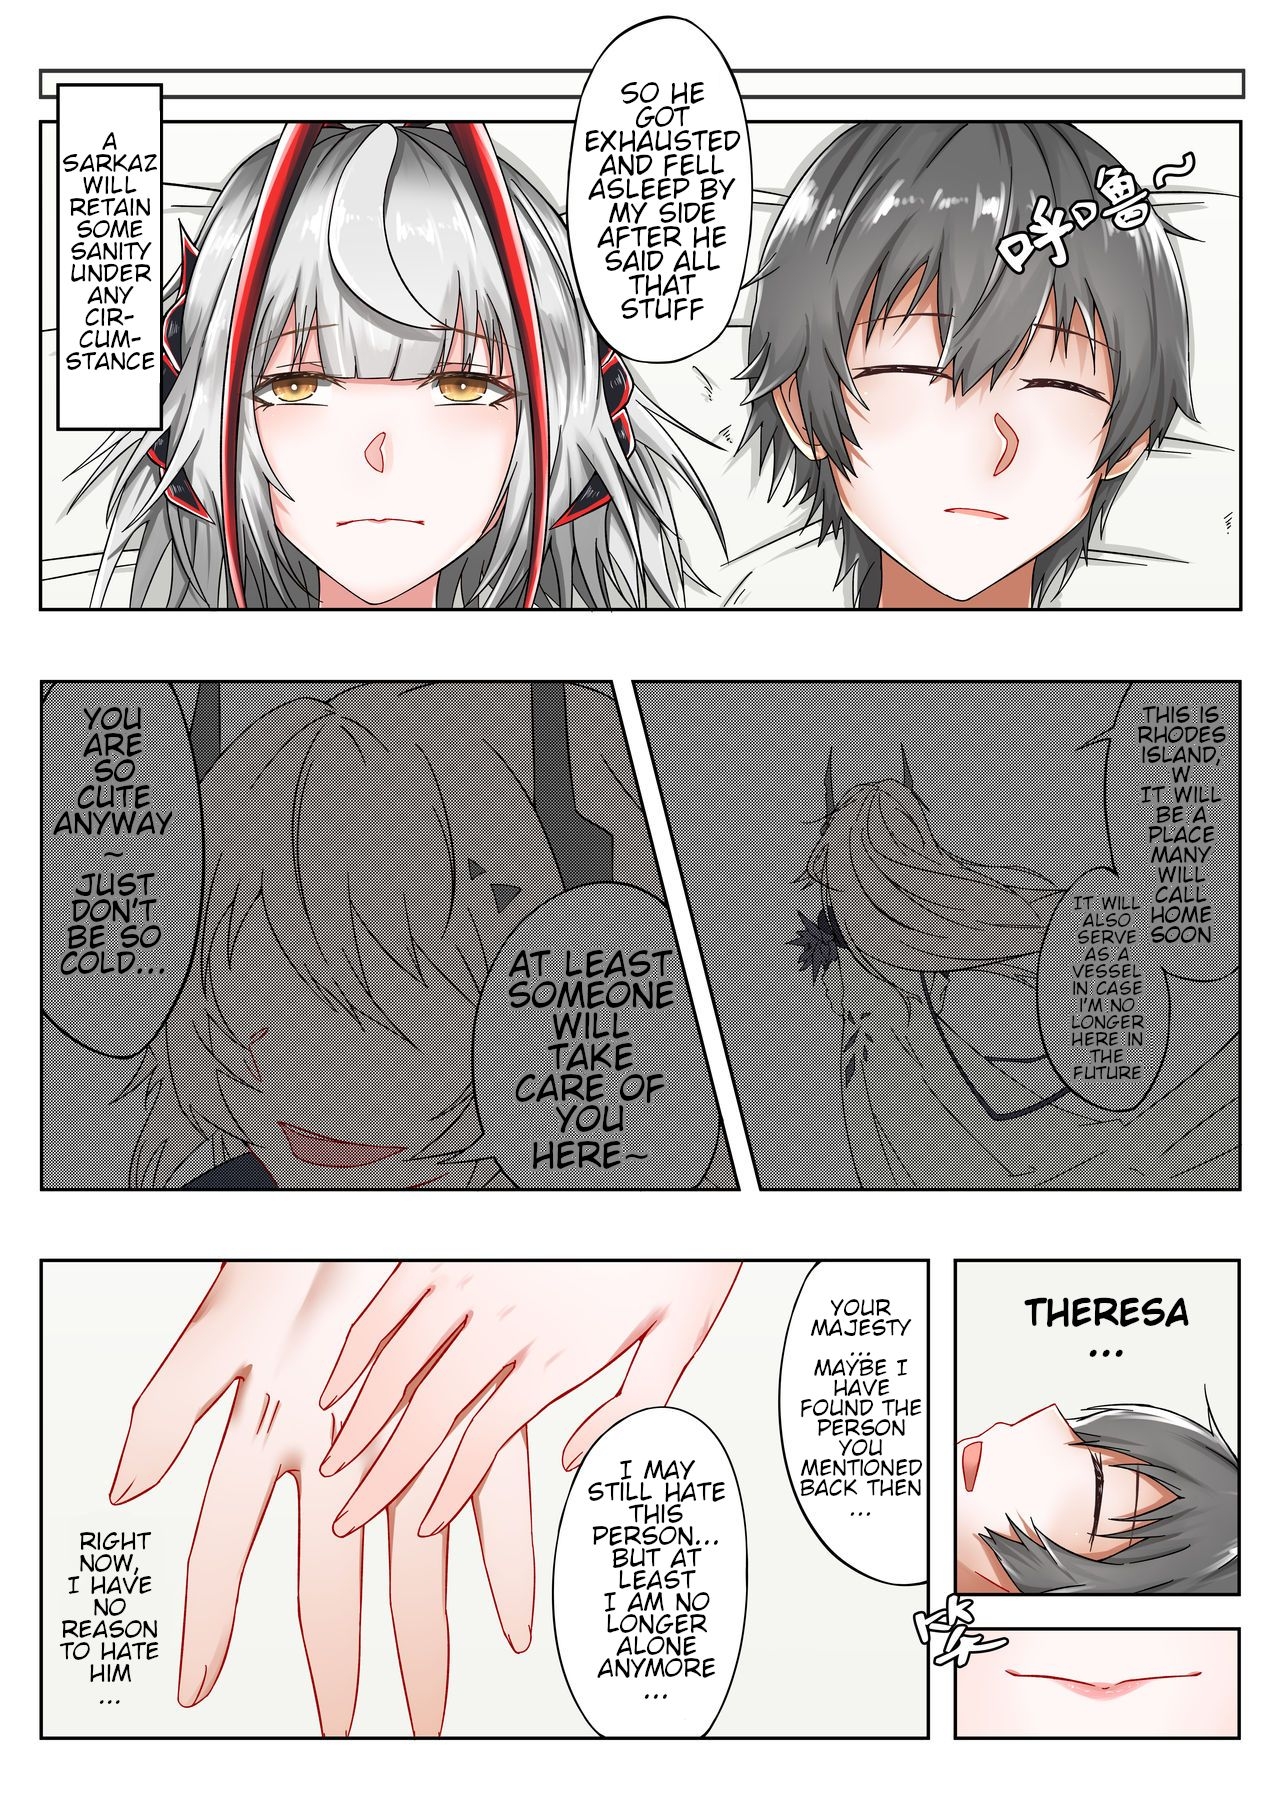 [TRNR] The one who is evil is also the one you love (Arknights) 27